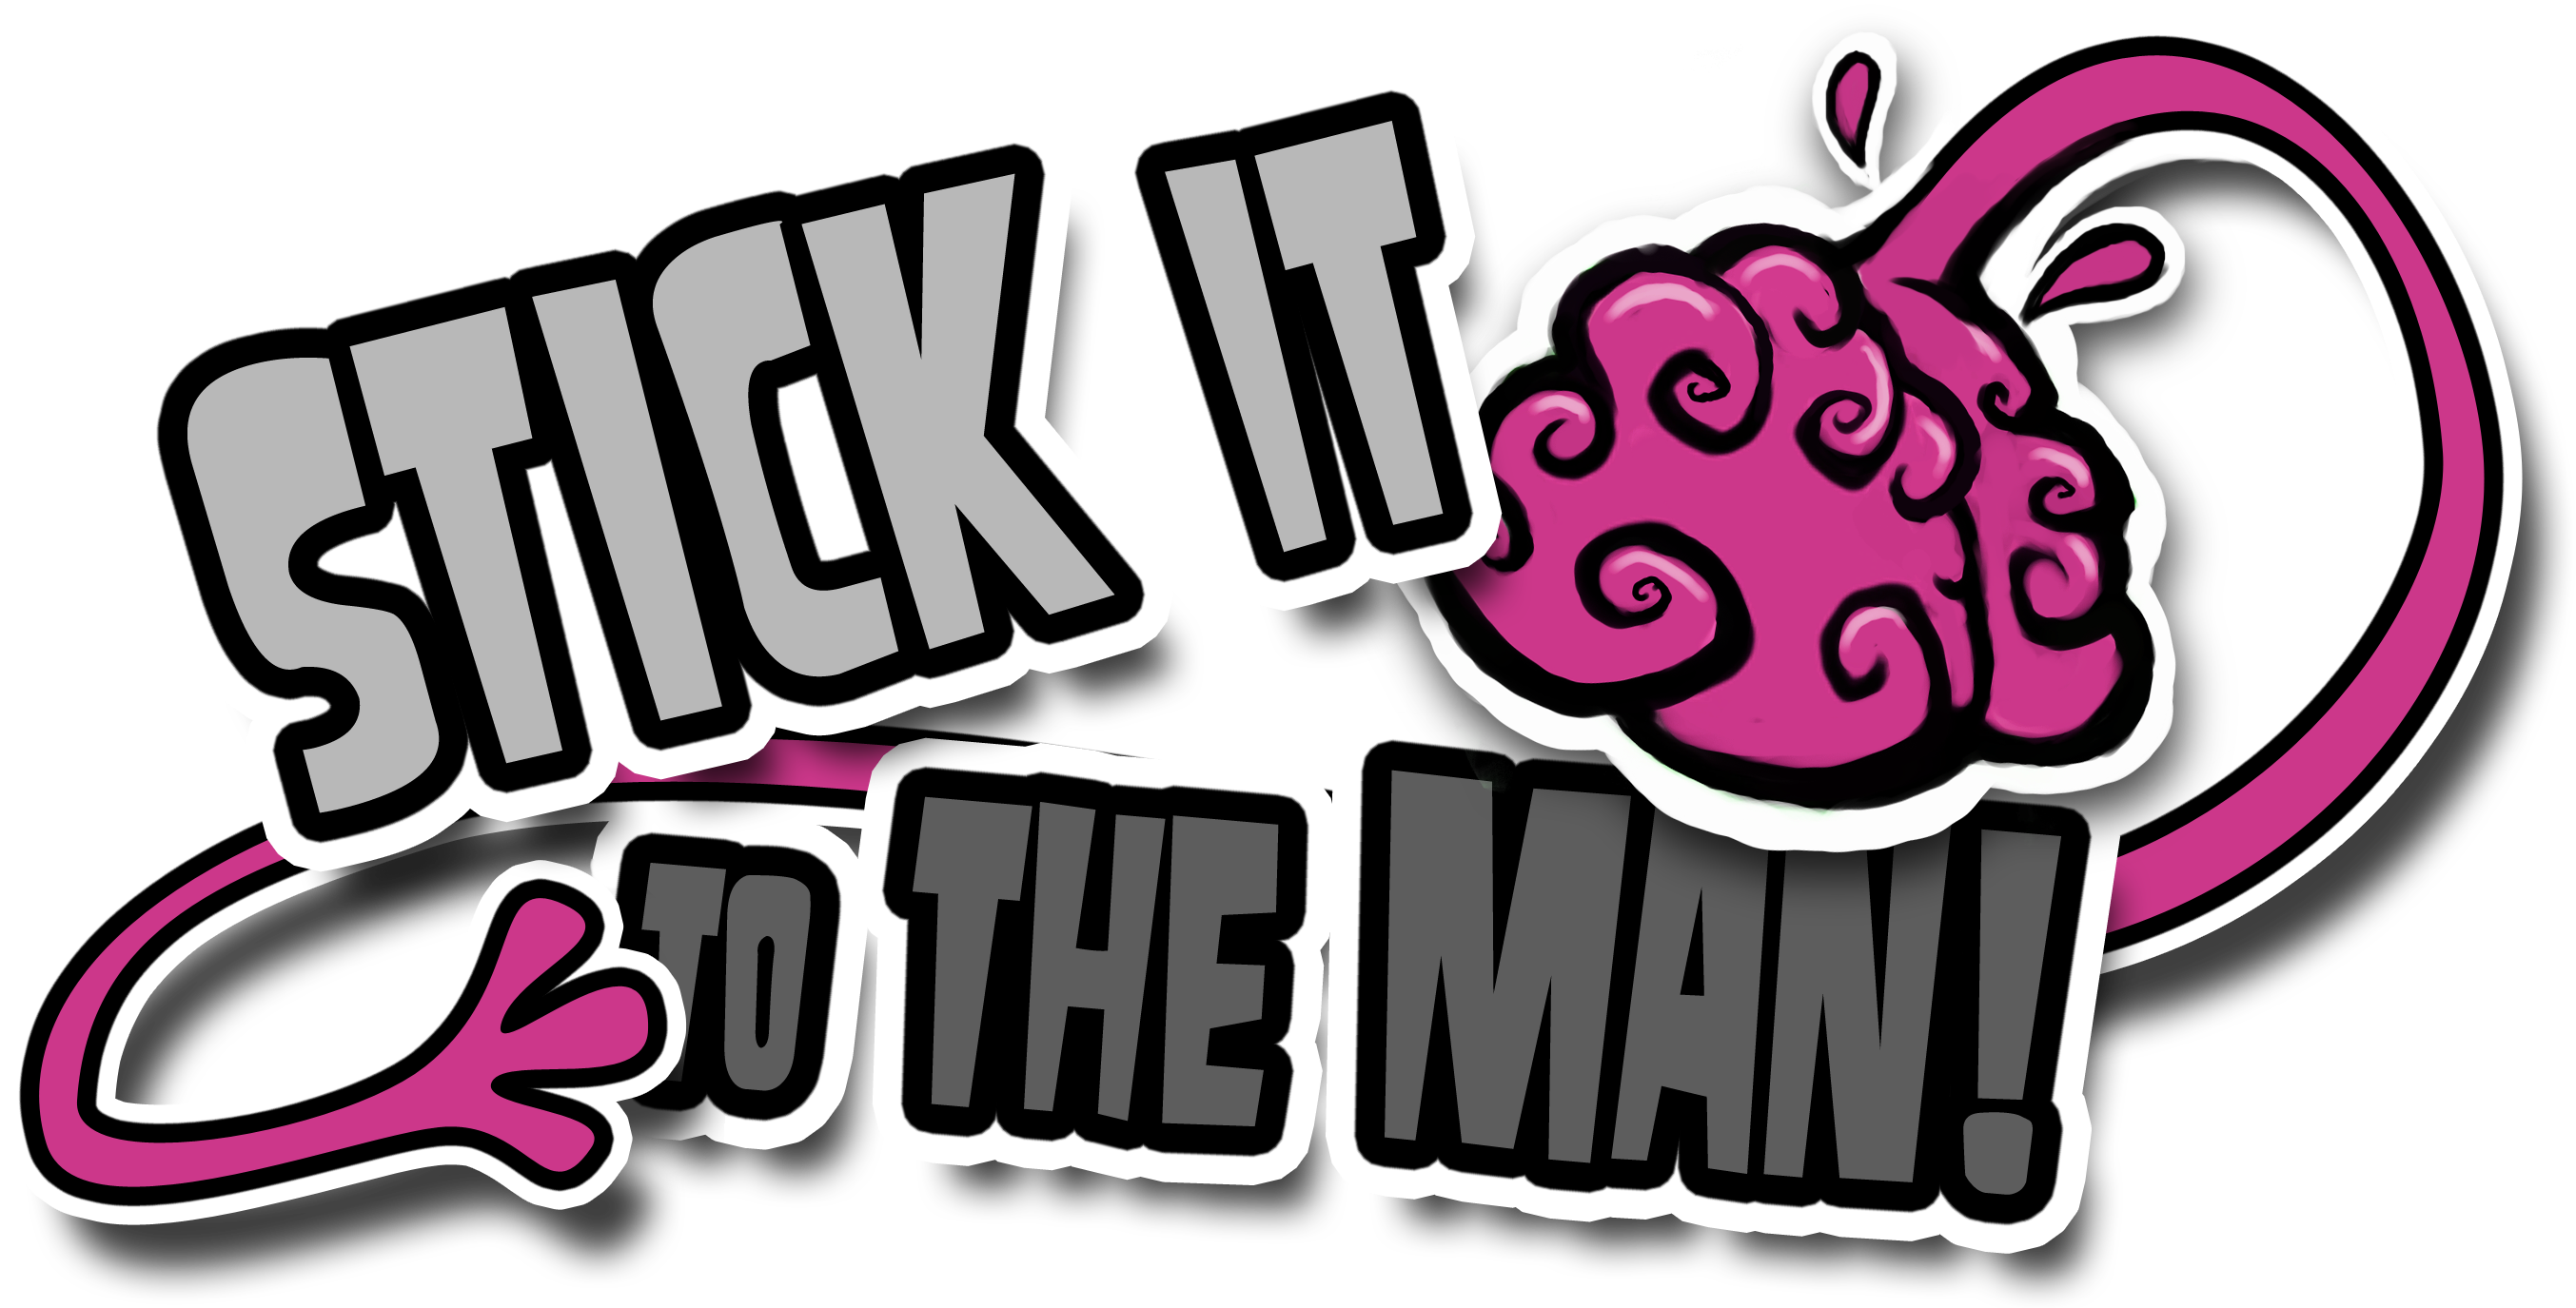 Stick It To The Man Coming To Wii U This Spring